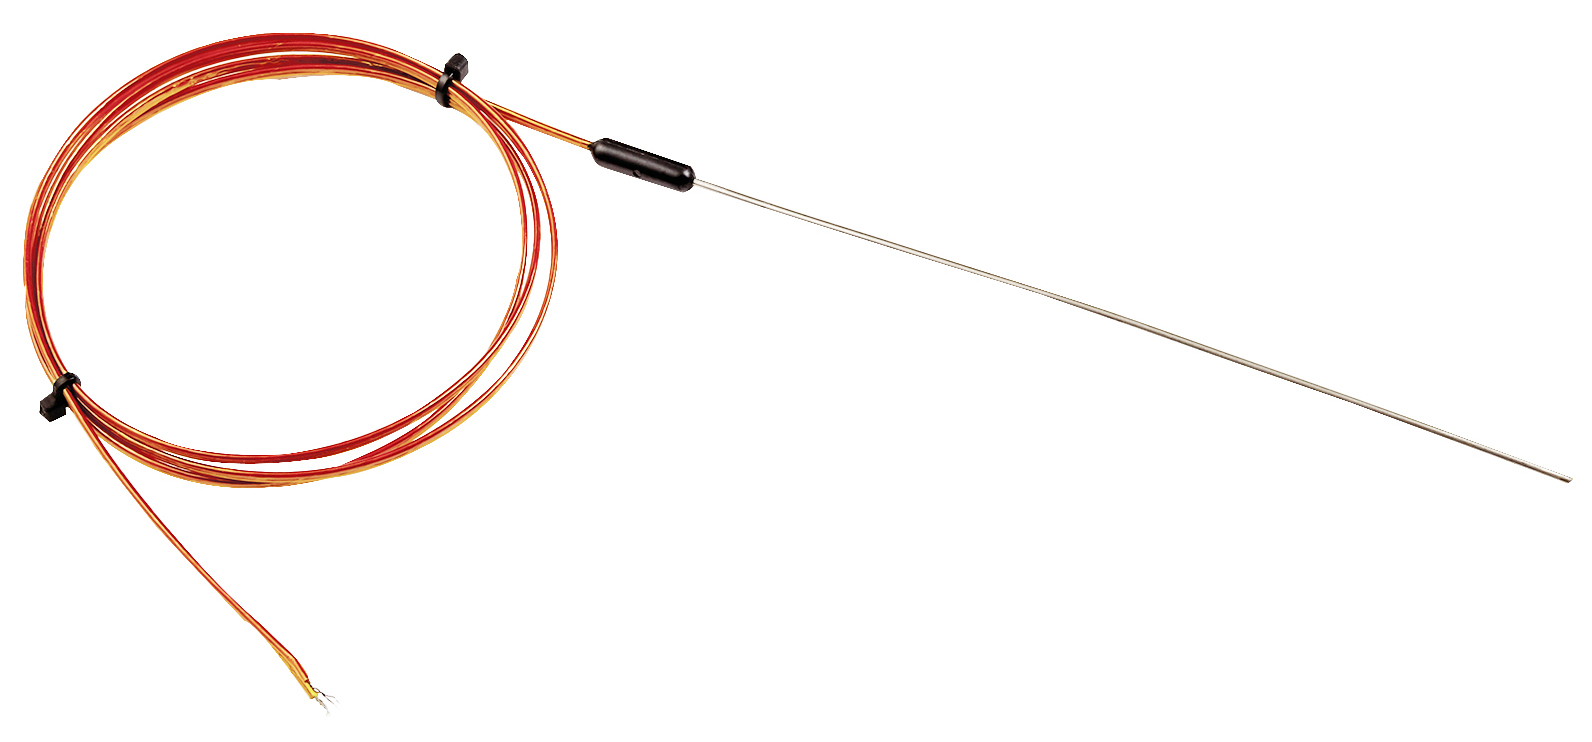 Thermocouple with omega thermocouple.jpg